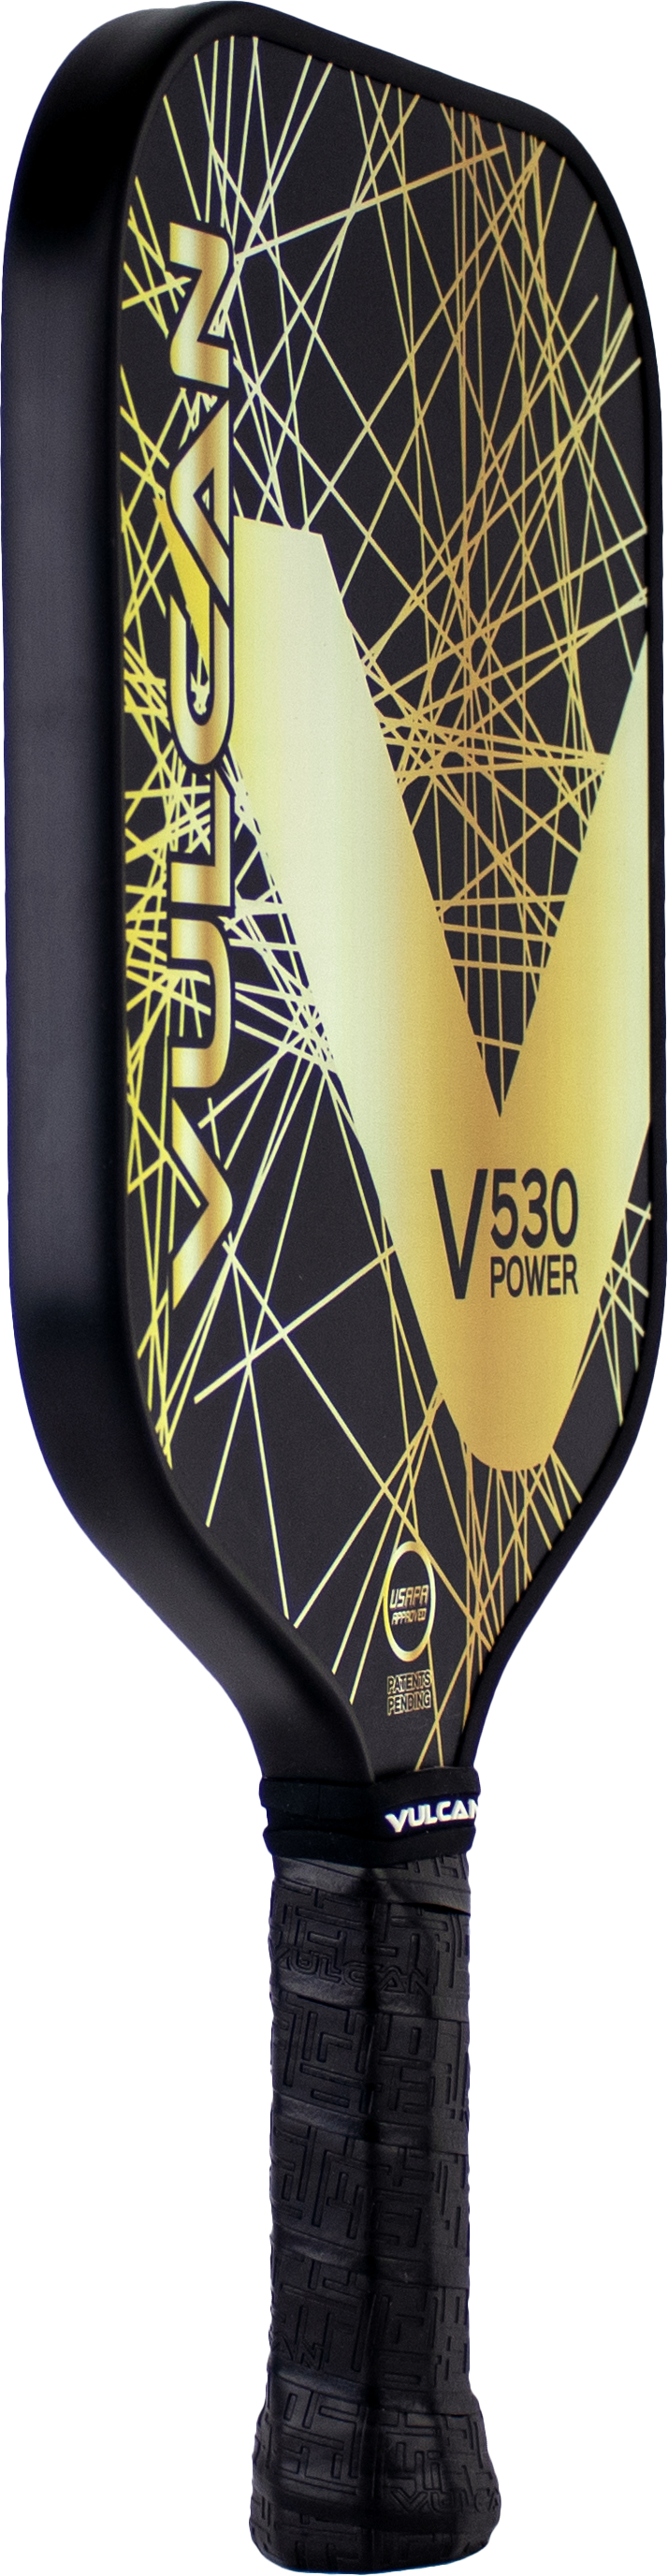 The Vulcan V530 Power Pickleball Paddle by Vulcan is shown on a white background.